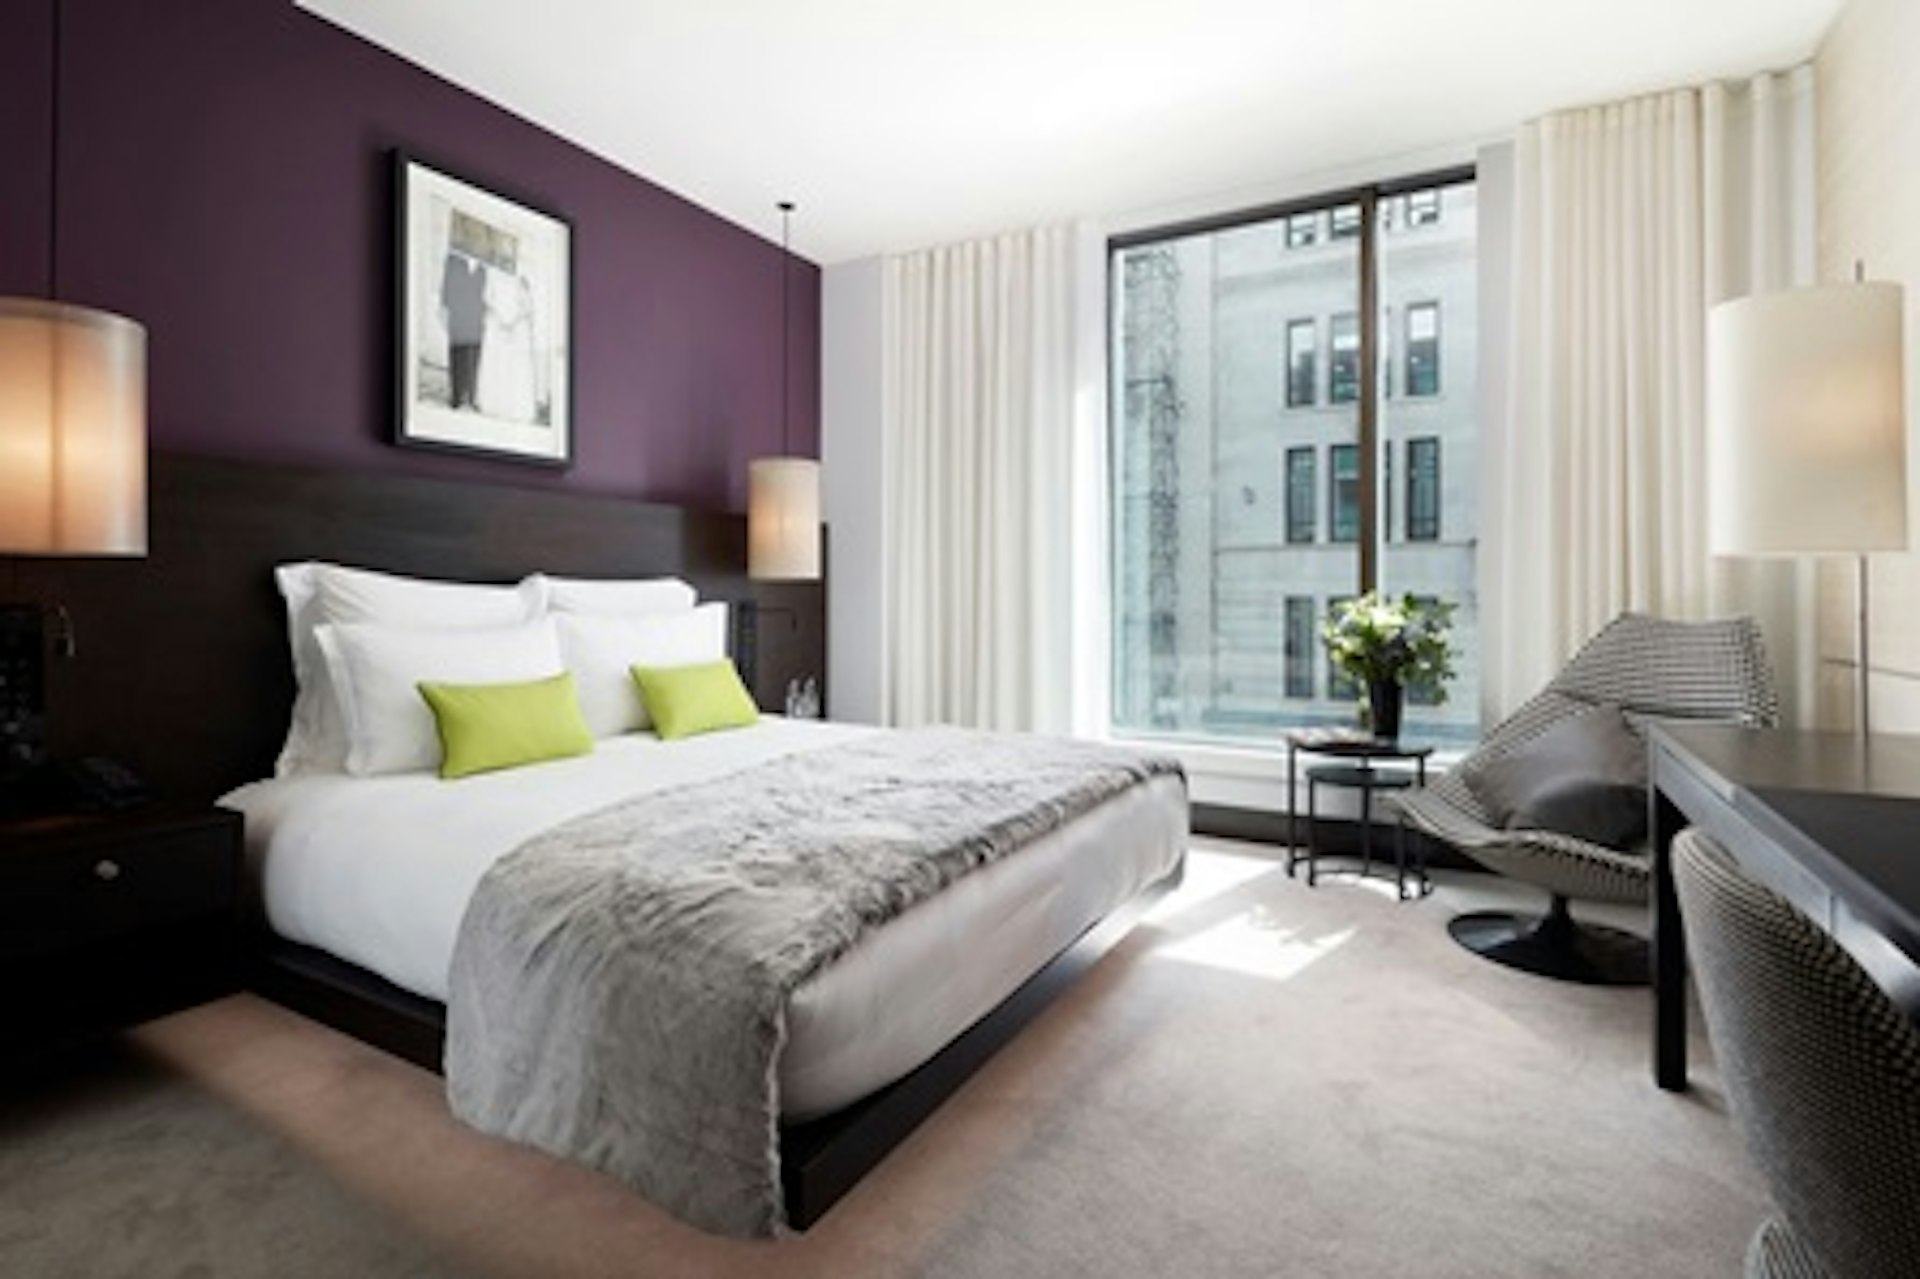 Luxury 5* London One Night Break with Brunch and Bottomless Fizz for Two at South Place Hotel 2